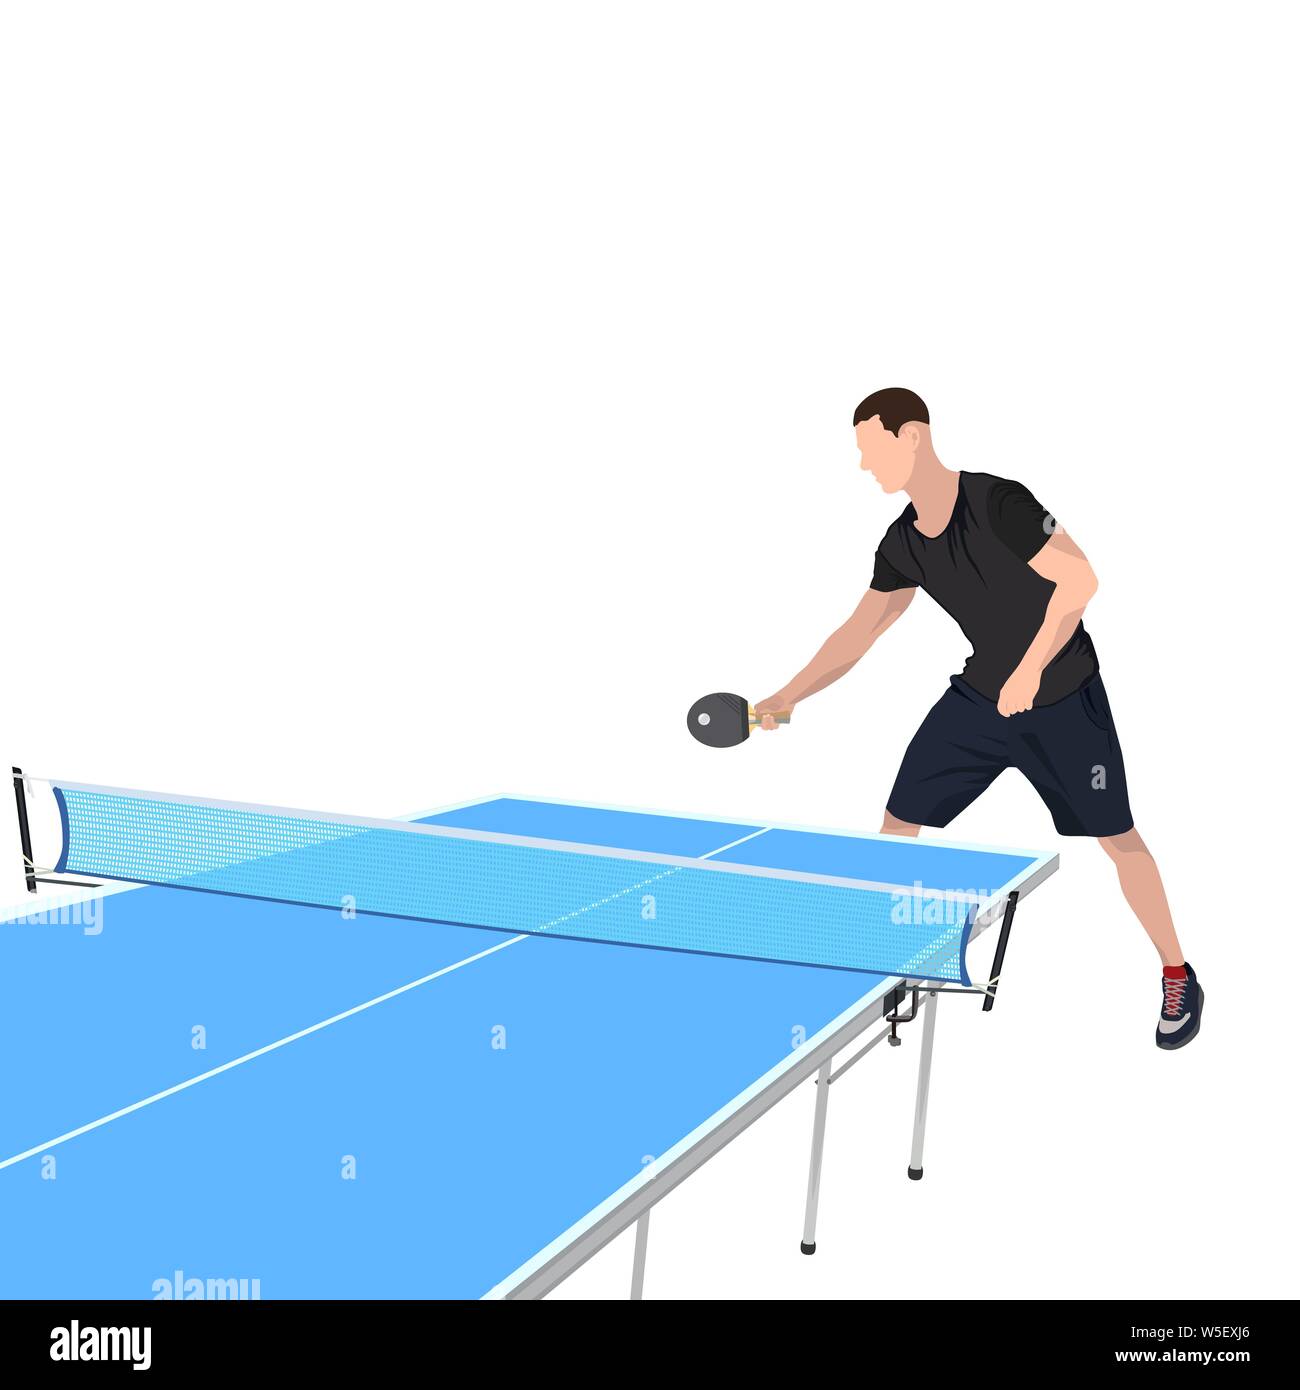 4,981 Ping Pong 2 Images, Stock Photos, 3D objects, & Vectors